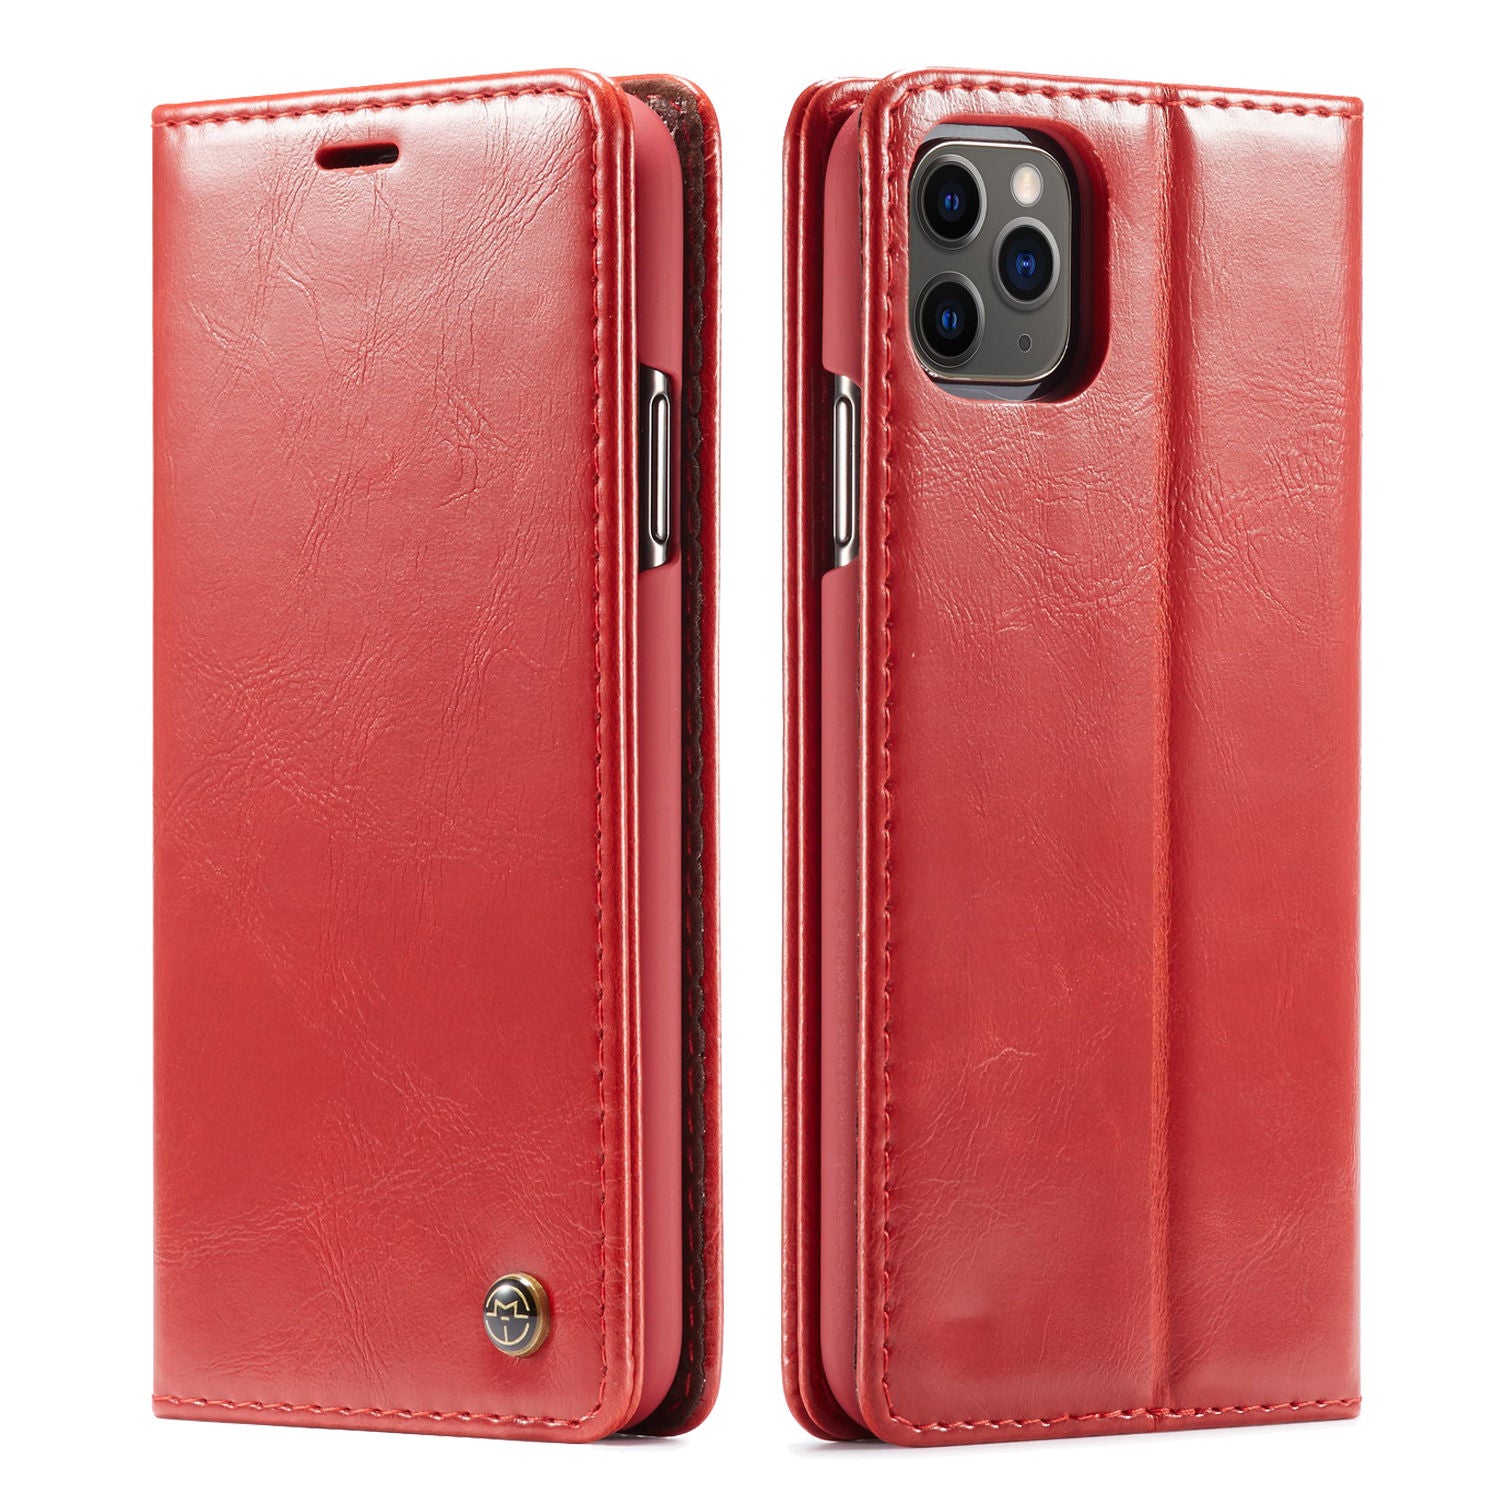 Luxury Soft PU Leather Wallet Magnetic Closure Case for iPhone 12 11 Pro X XR XS Max 8 7 6S Plus